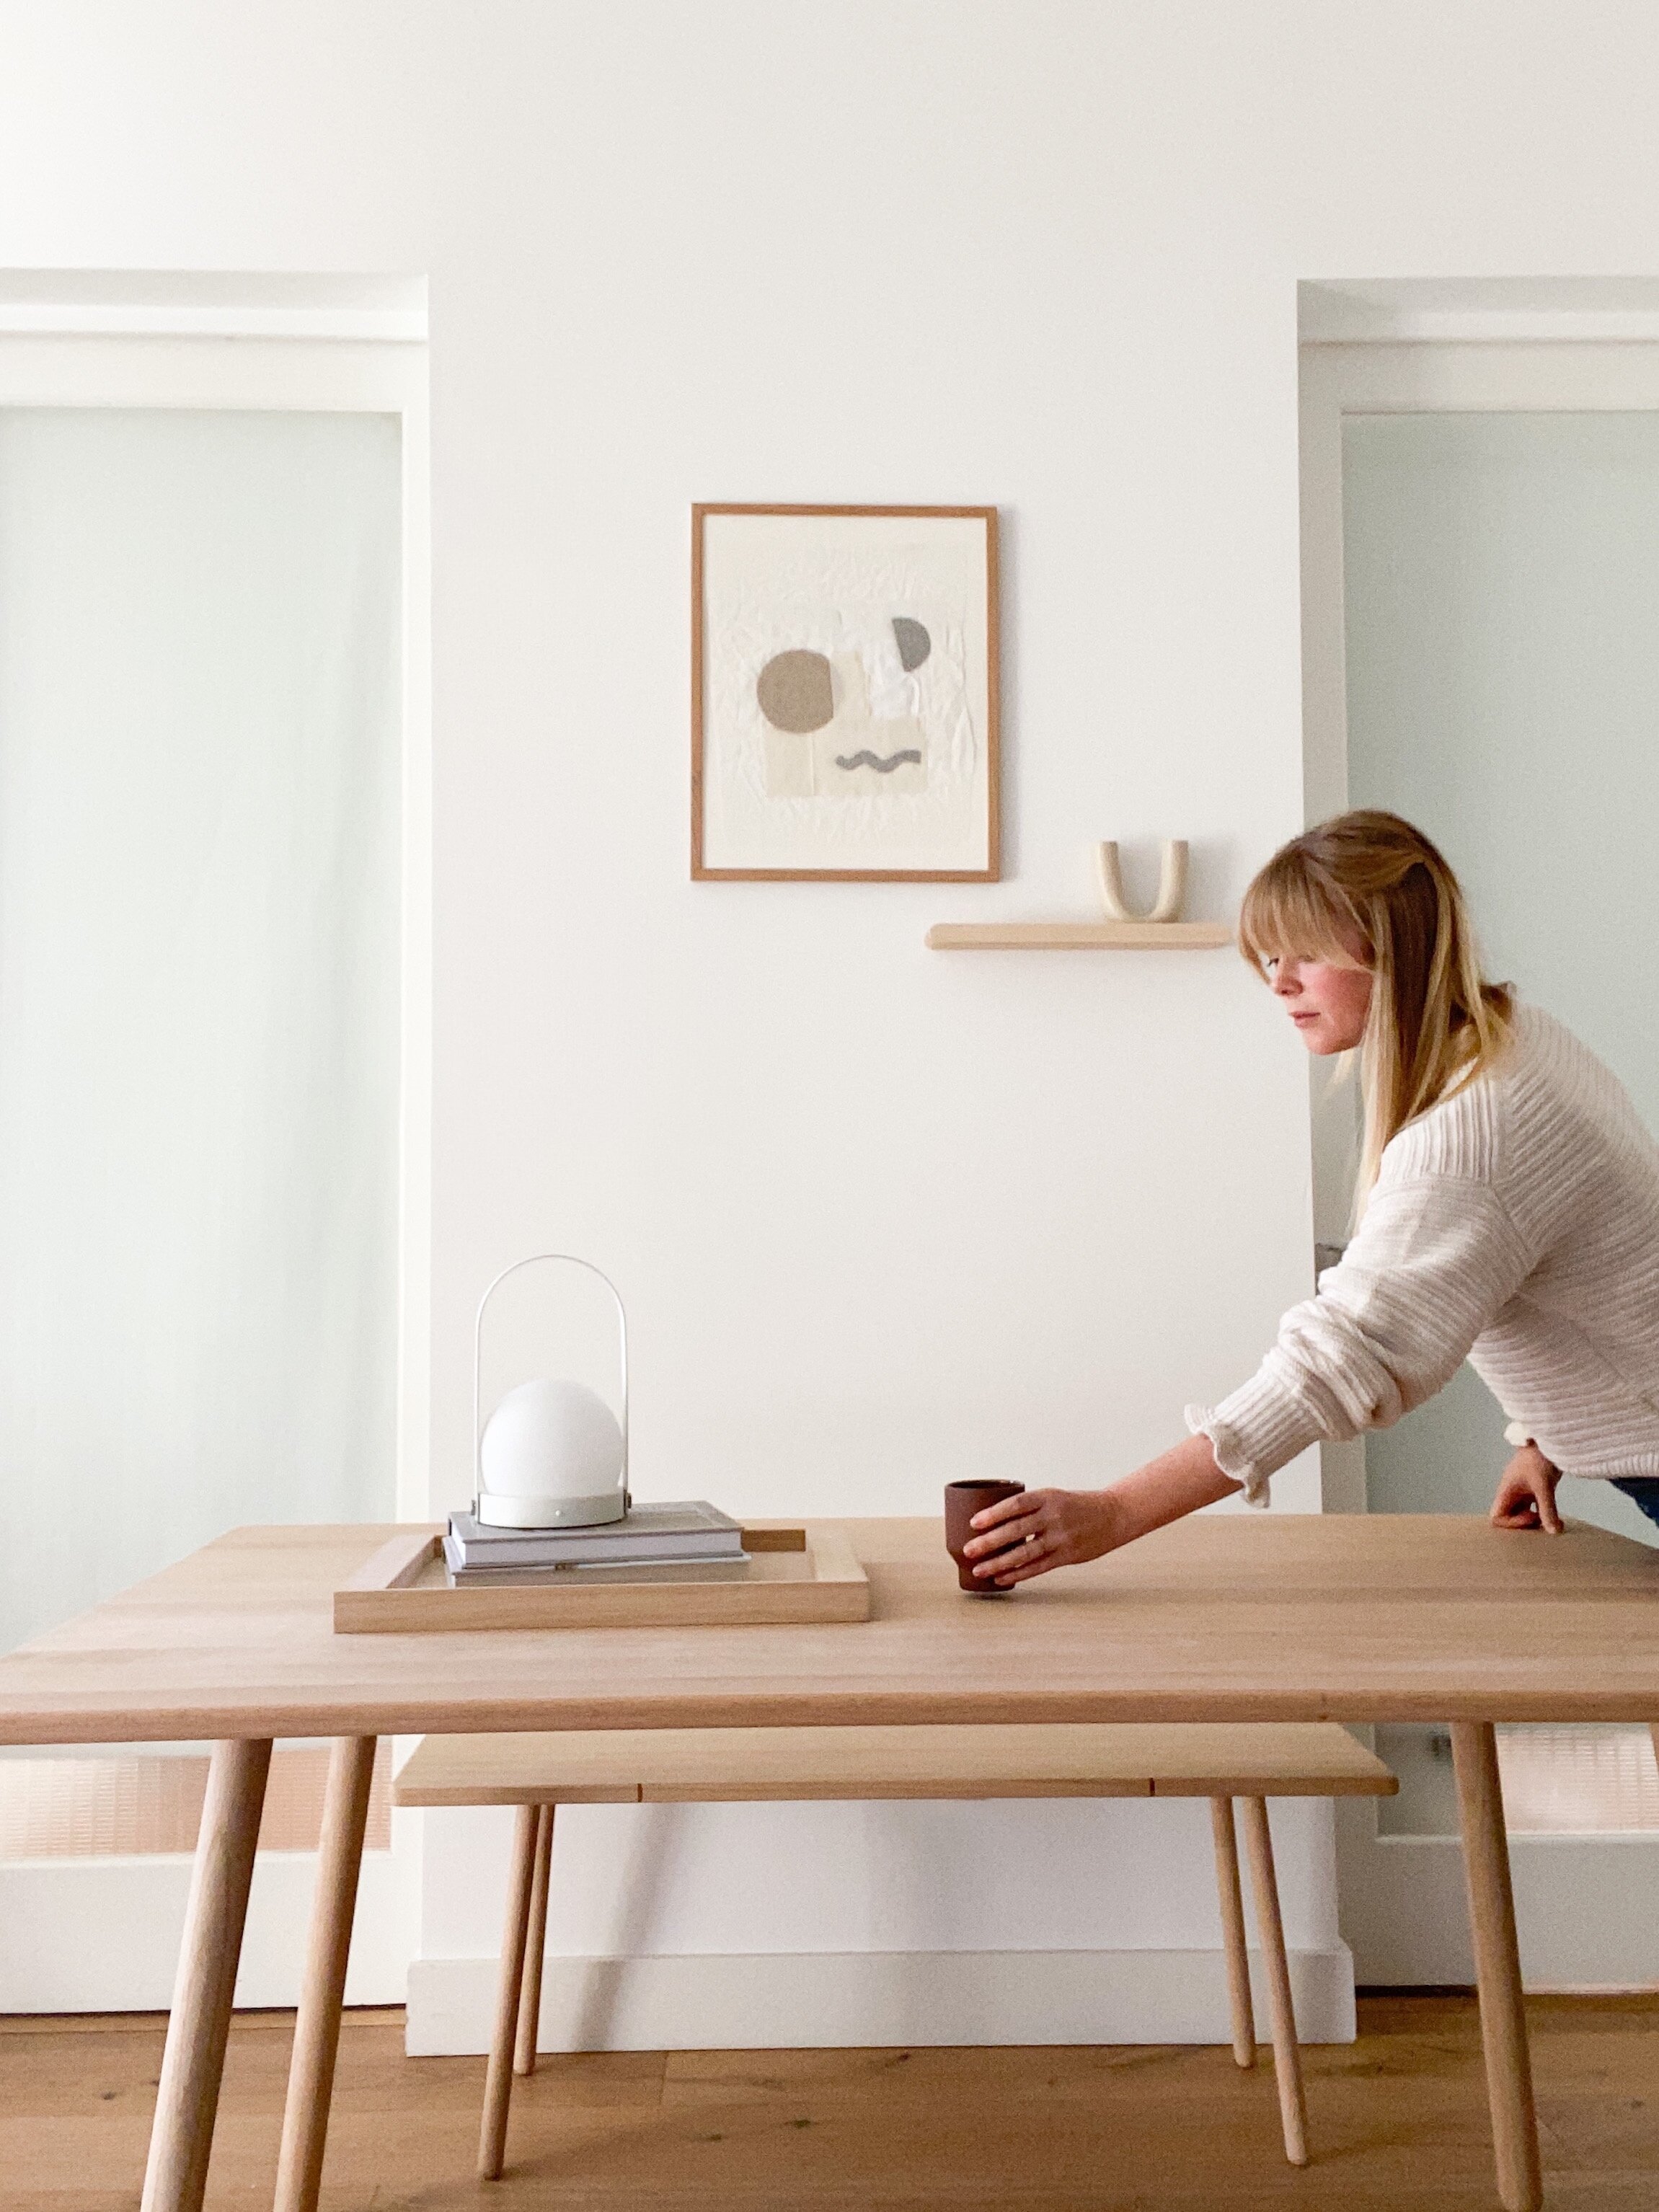 Georg dining table and bench by Skagerak. Beautiful tray is also Skagerak Tray No. 10.